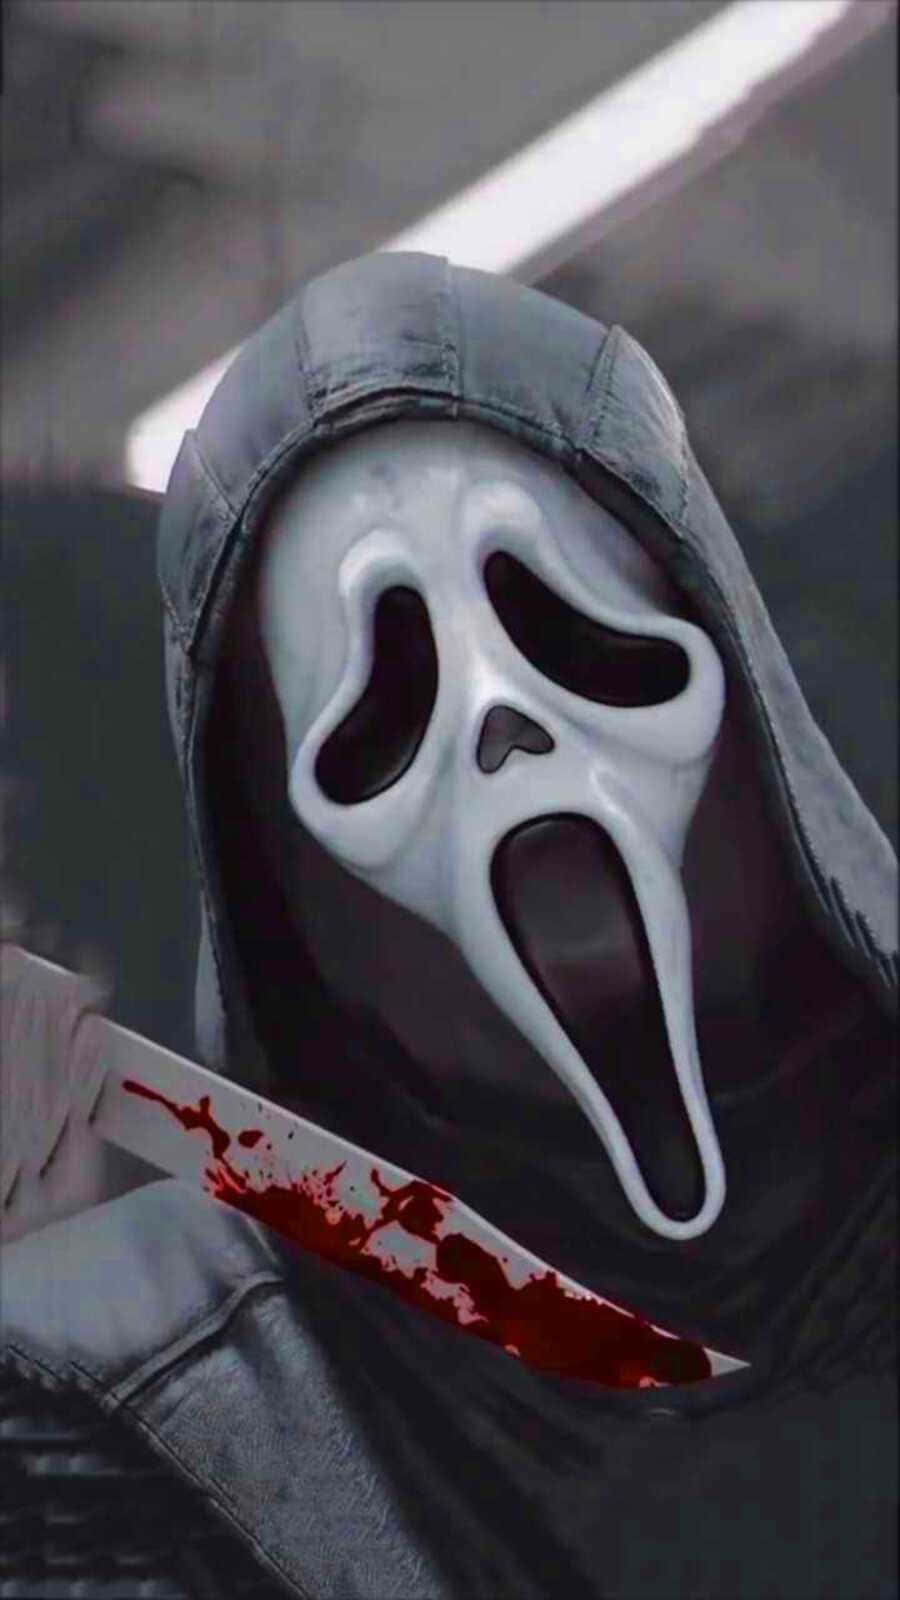 A man wearing a scream mask and holding a knife. - Ghostface